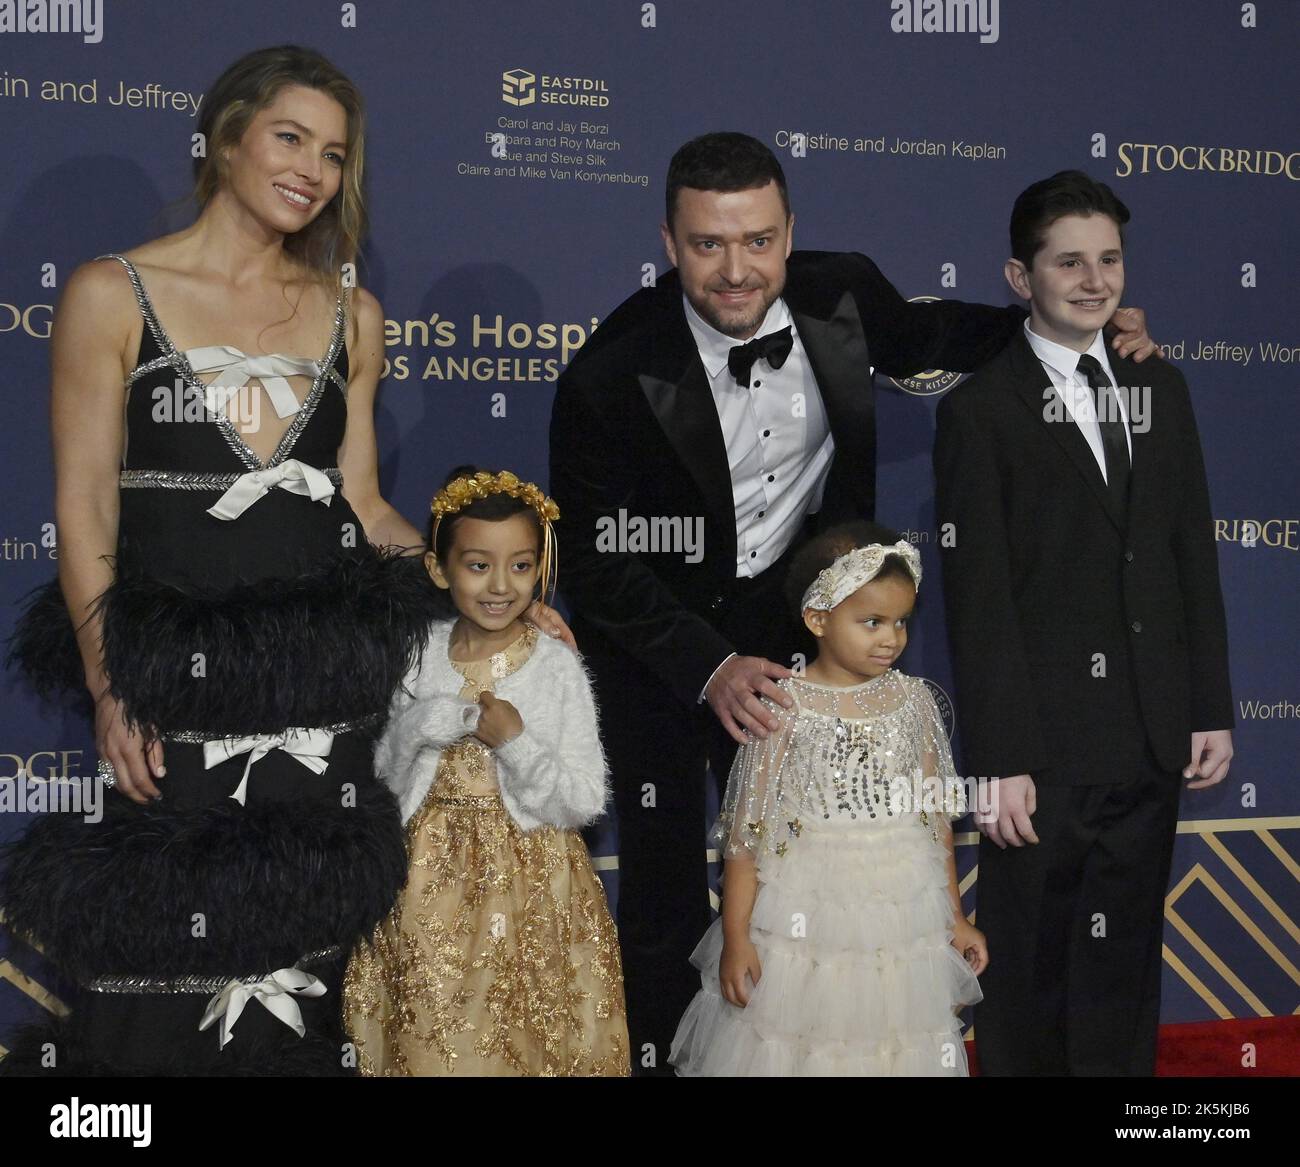 Jessica Biel and Justin Timberlake, and CHLA patients Ella, Delilah and Nathan (L-R) attend the Children's Hospital Los Angeles CHLA gala at Barker Hangar in Santa Monica, California on Saturday, October 8, 2022. Hosted by actor Chris Pine and his father, actor Robert Pine, the evening featured a live performance by Timberlake and paid tribute to the hospital's frontline clinical team members and philanthropists who help CHLA fulfill its mission of creating hope and building healthier futures for children. Photo by Jim Ruymen/UPI Stock Photo